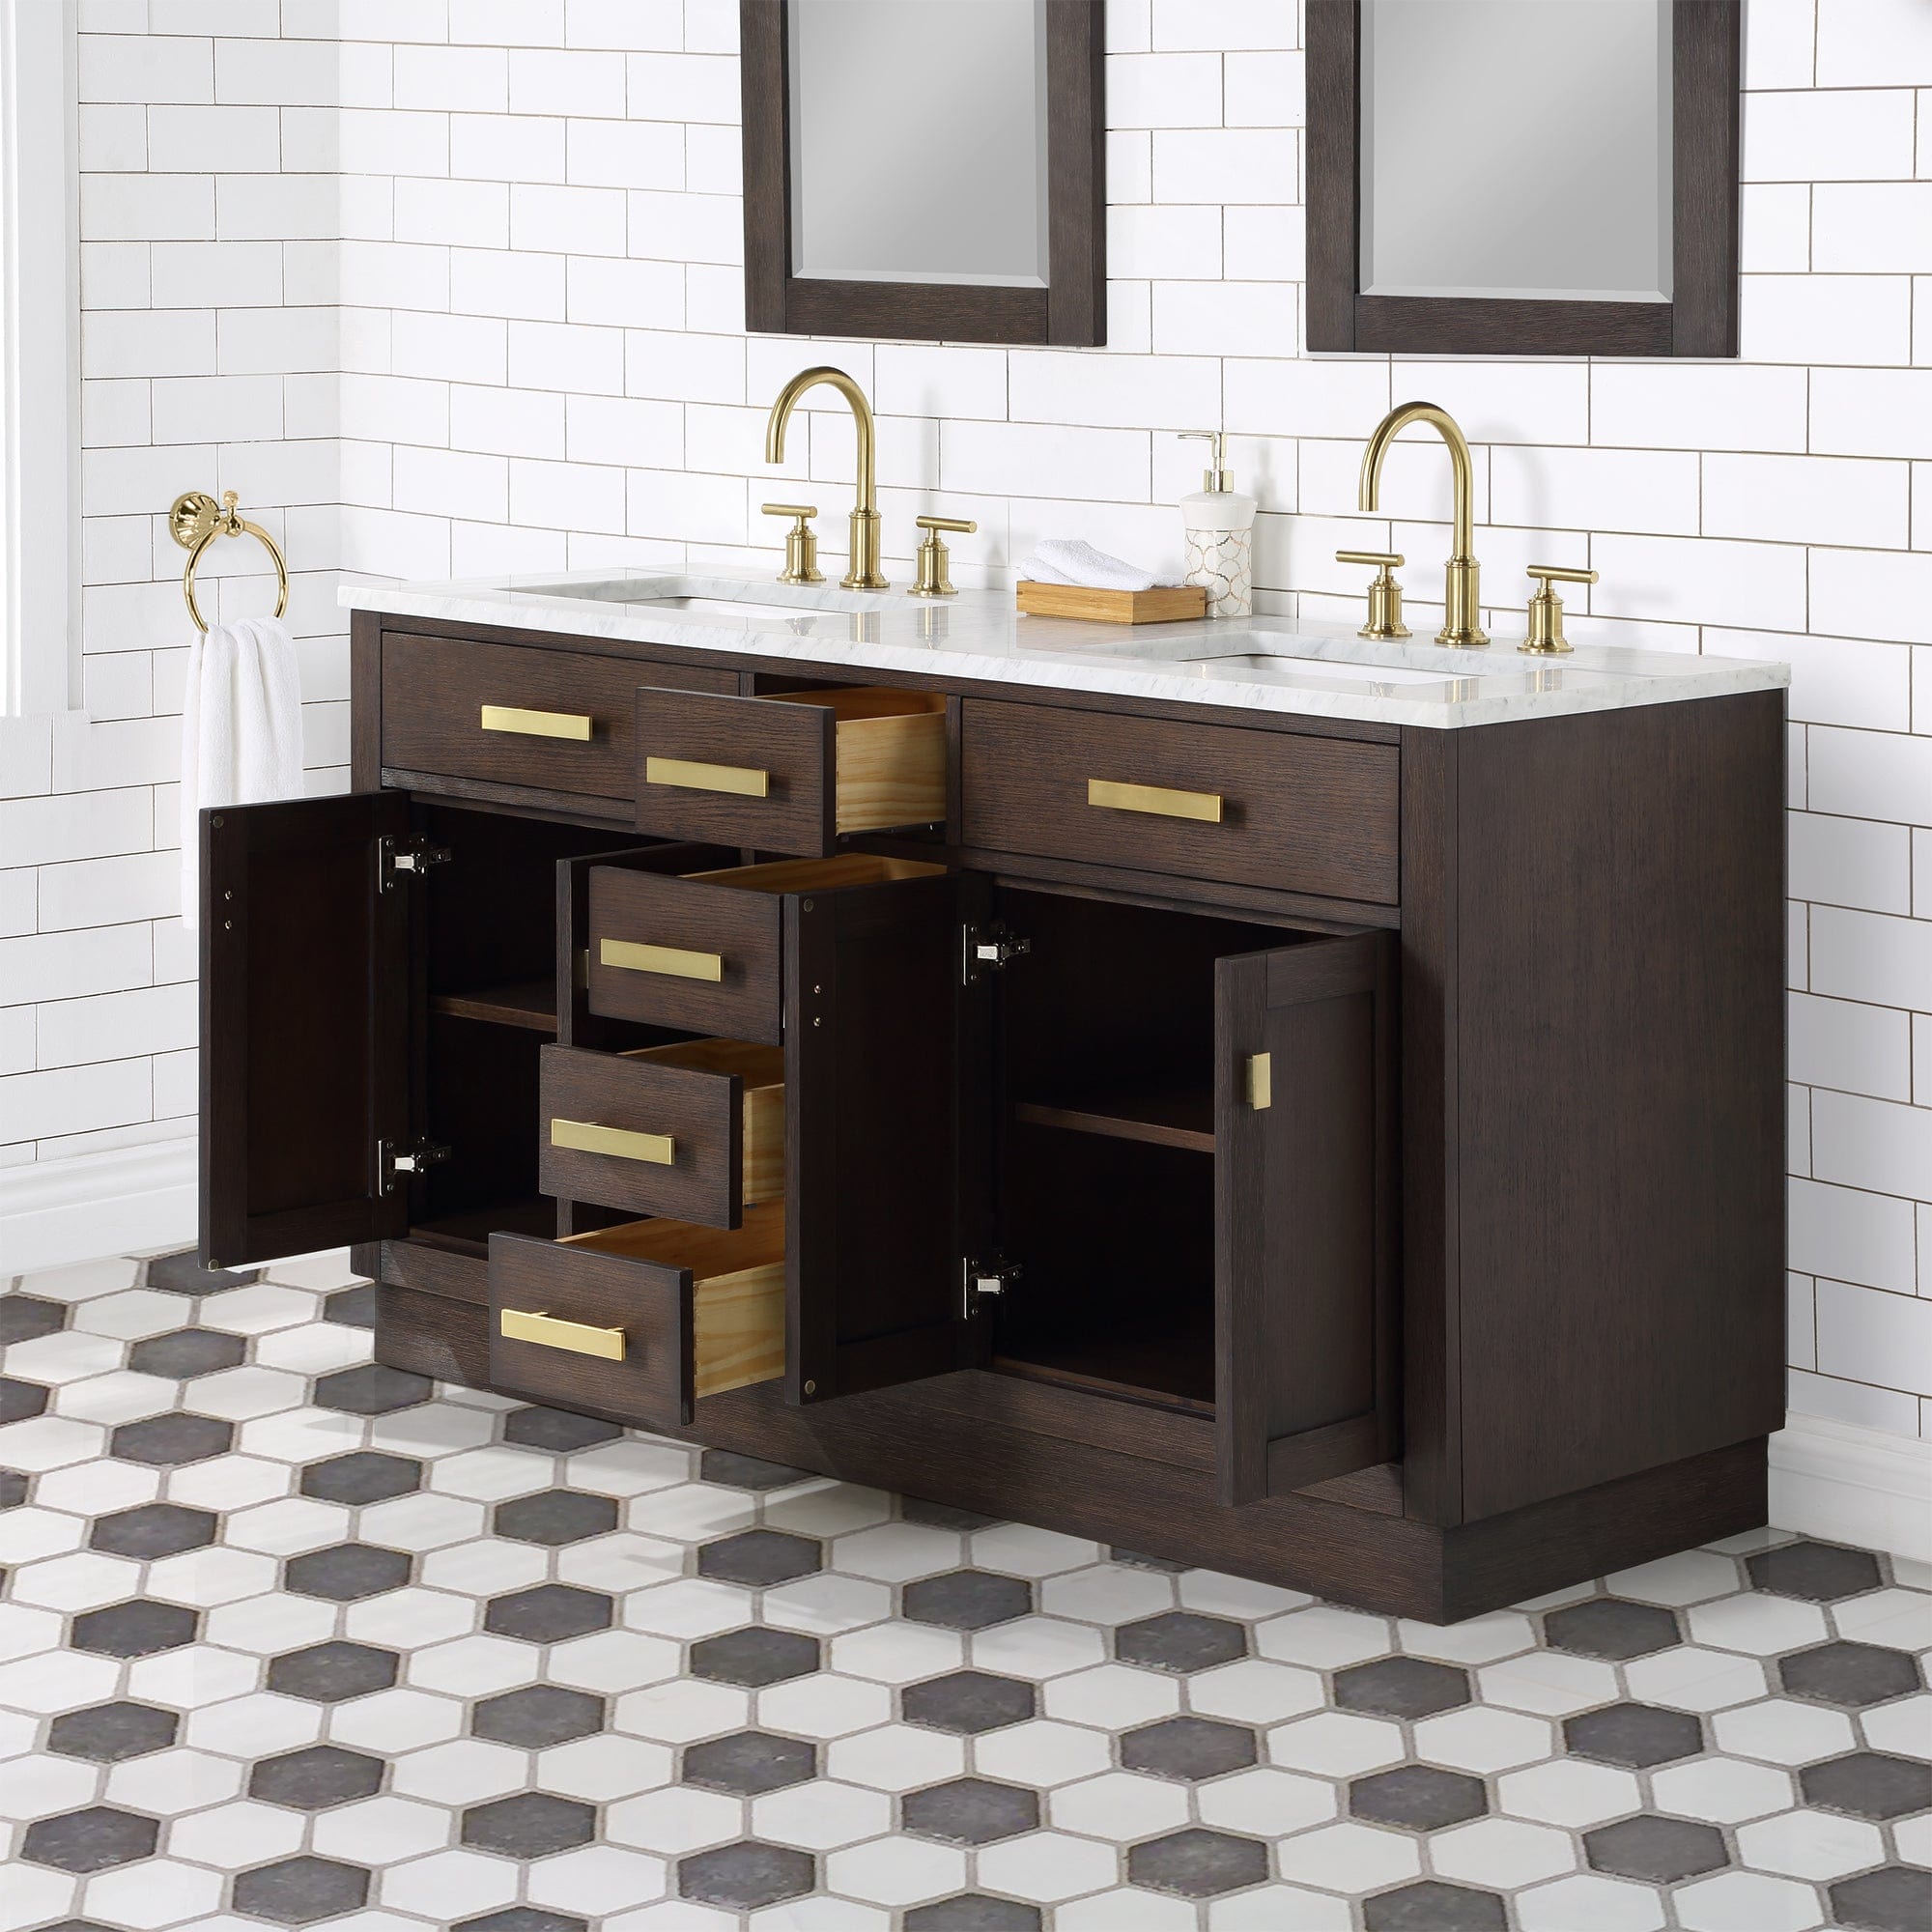 Chestnut 60 In. Double Sink Carrara White Marble Countertop Vanity In Brown Oak with Grooseneck Faucets - Molaix732030764828CH60CW06BK-000BL1406